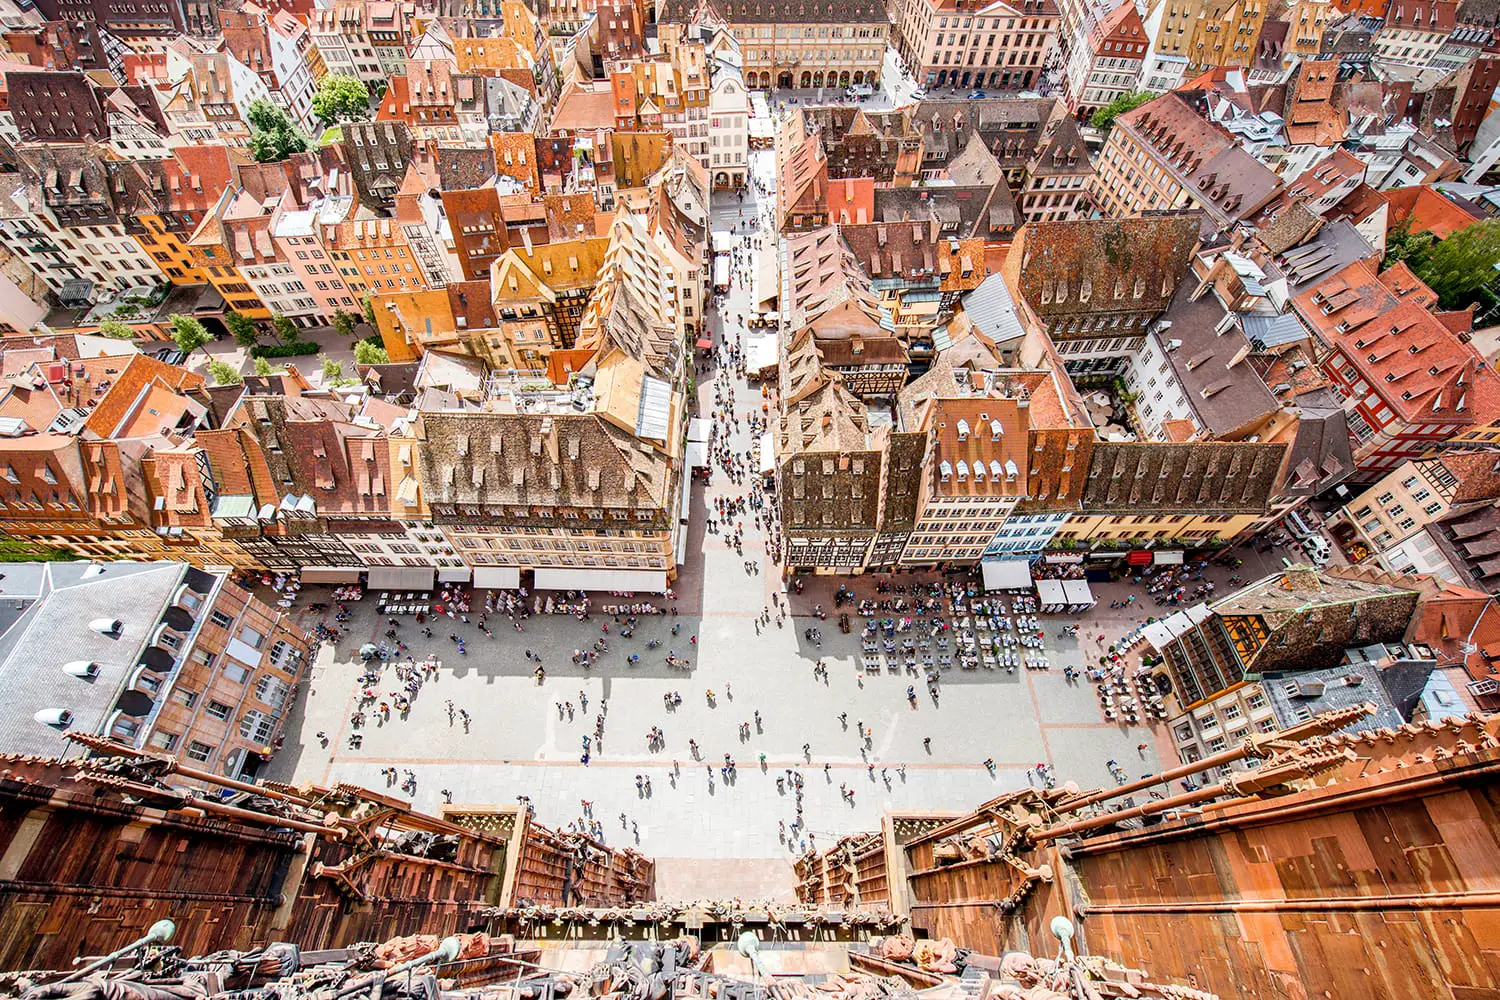 Top cityscape view on the cathedral square crowded with people in the old town of Strasbourg city, France